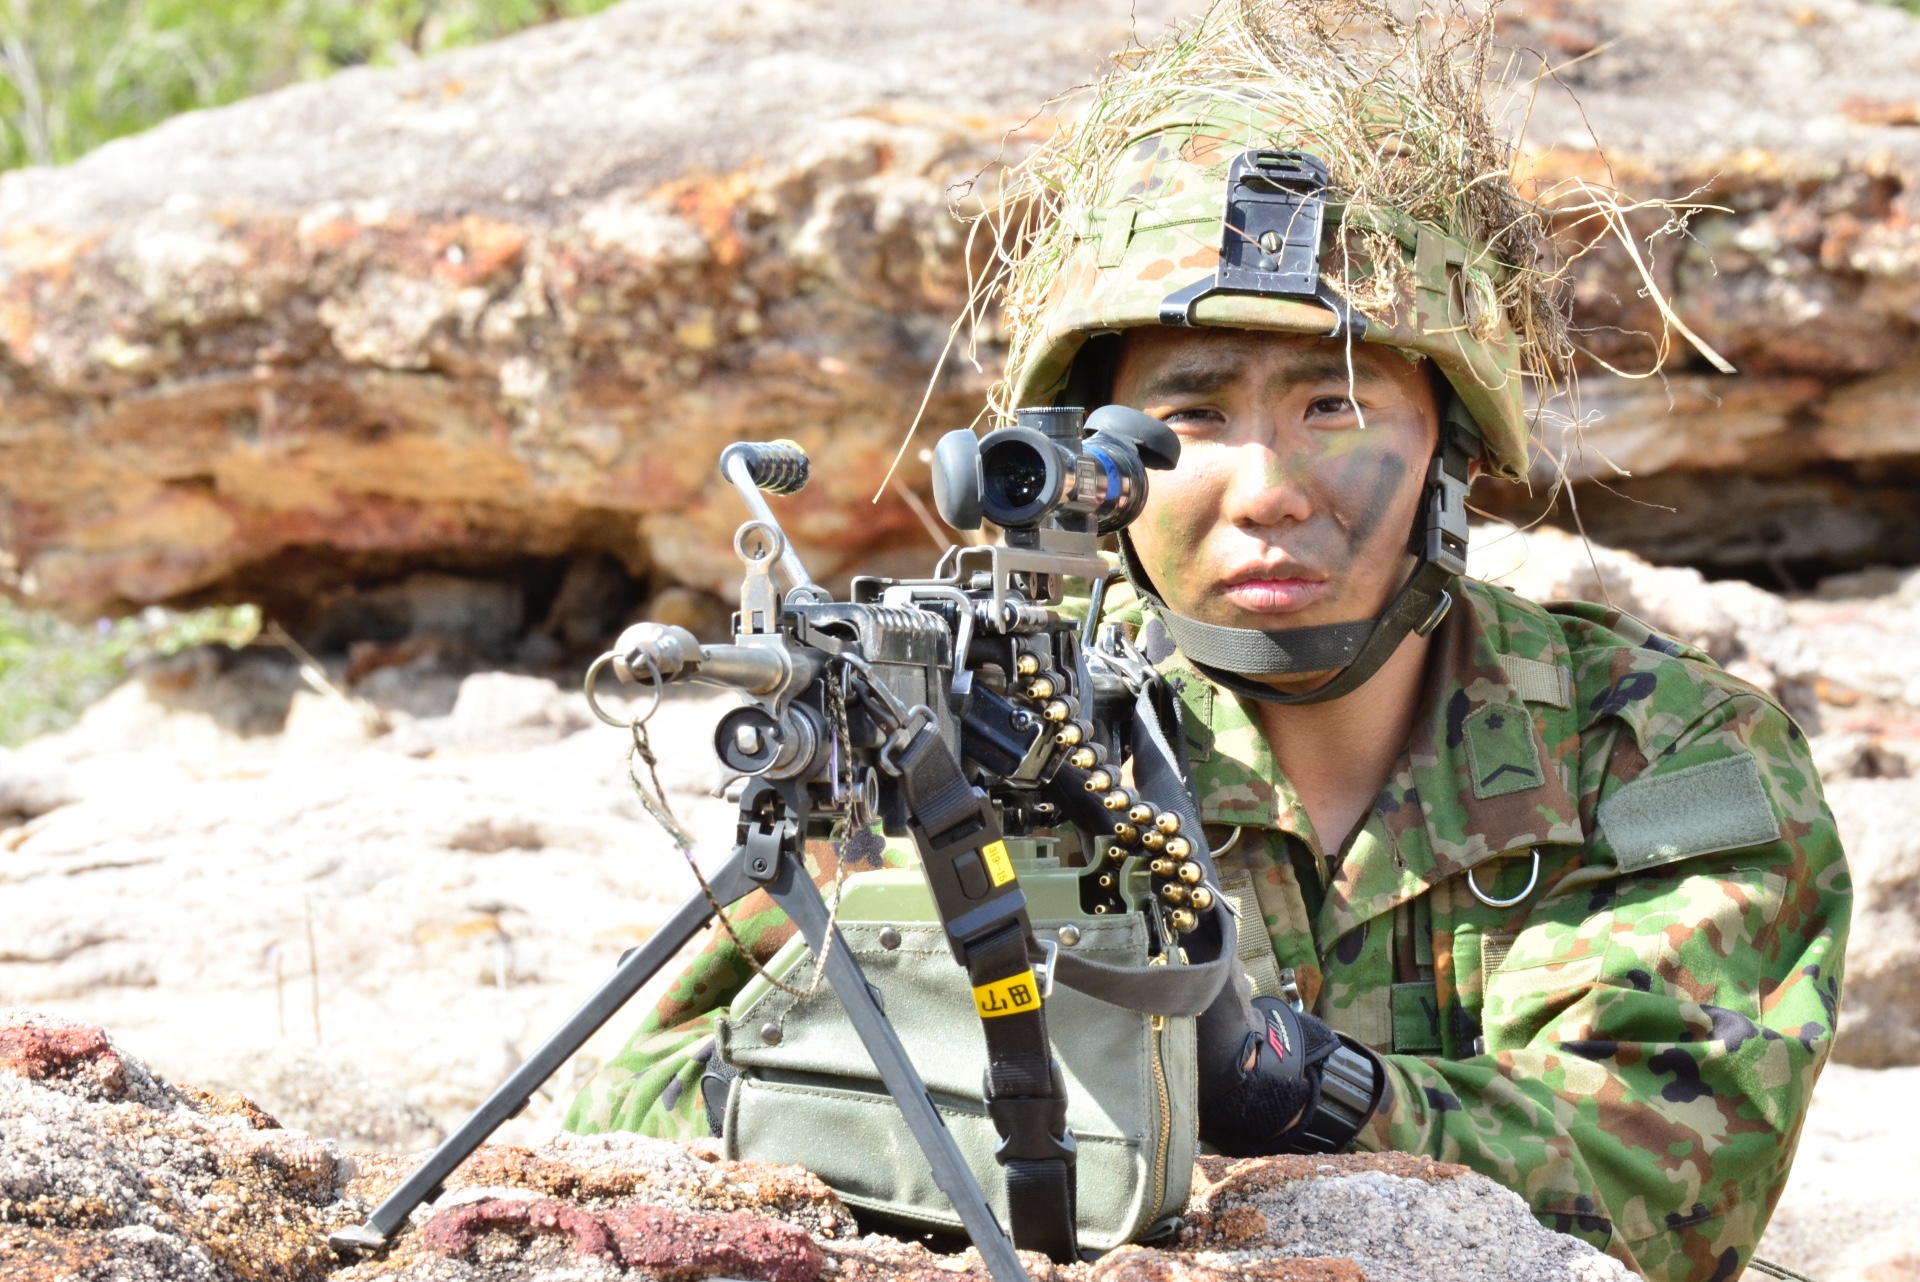 A Japanese Ground Self-Defense Force provides security during Exercise Talisman Saber 17 at Shoalwater Bay Training Area, Queensland, Australia